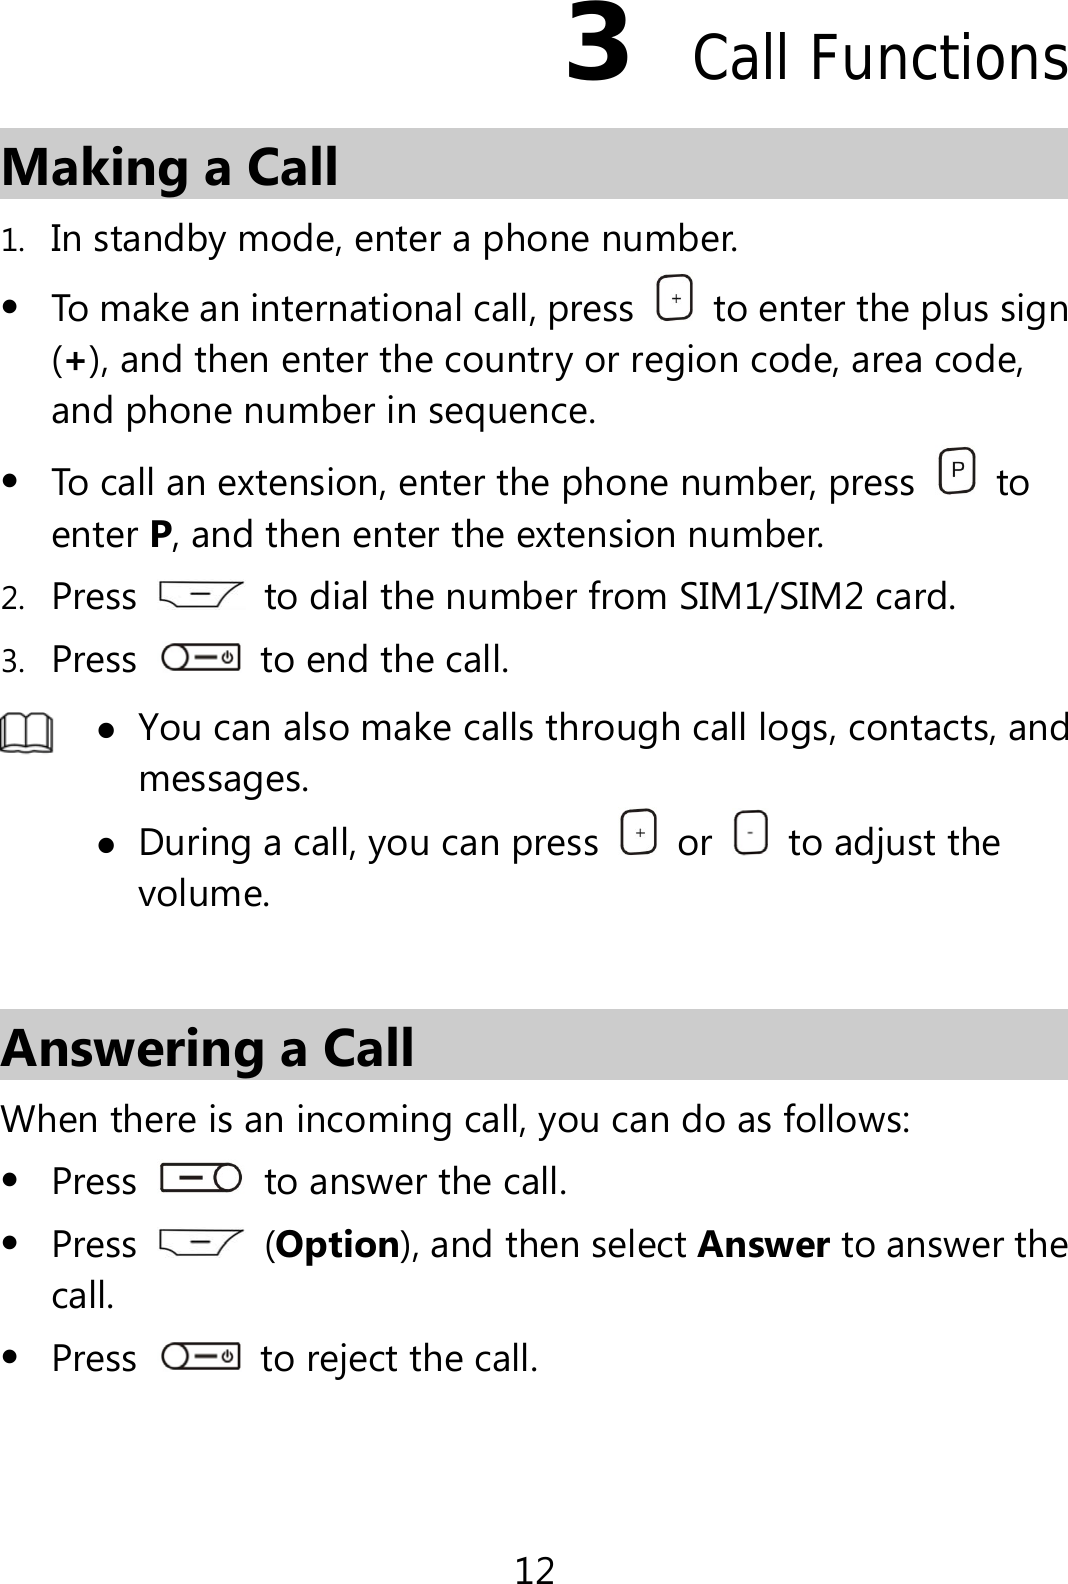 12 3  Call Functions Making a Call 1. In standby mode, enter a phone number.  To make an international call, press    to enter the plus sign (+), and then enter the country or region code, area code, and phone number in sequence.  To call an extension, enter the phone number, press   to enter P, and then enter the extension number. 2. Press    to dial the number from SIM1/SIM2 card. 3. Press    to end the call.   You can also make calls through call logs, contacts, and messages.  During a call, you can press   or    to adjust the volume.  Answering a Call When there is an incoming call, you can do as follows:  Press    to answer the call.  Press   (Option), and then select Answer to answer the call.  Press    to reject the call. 